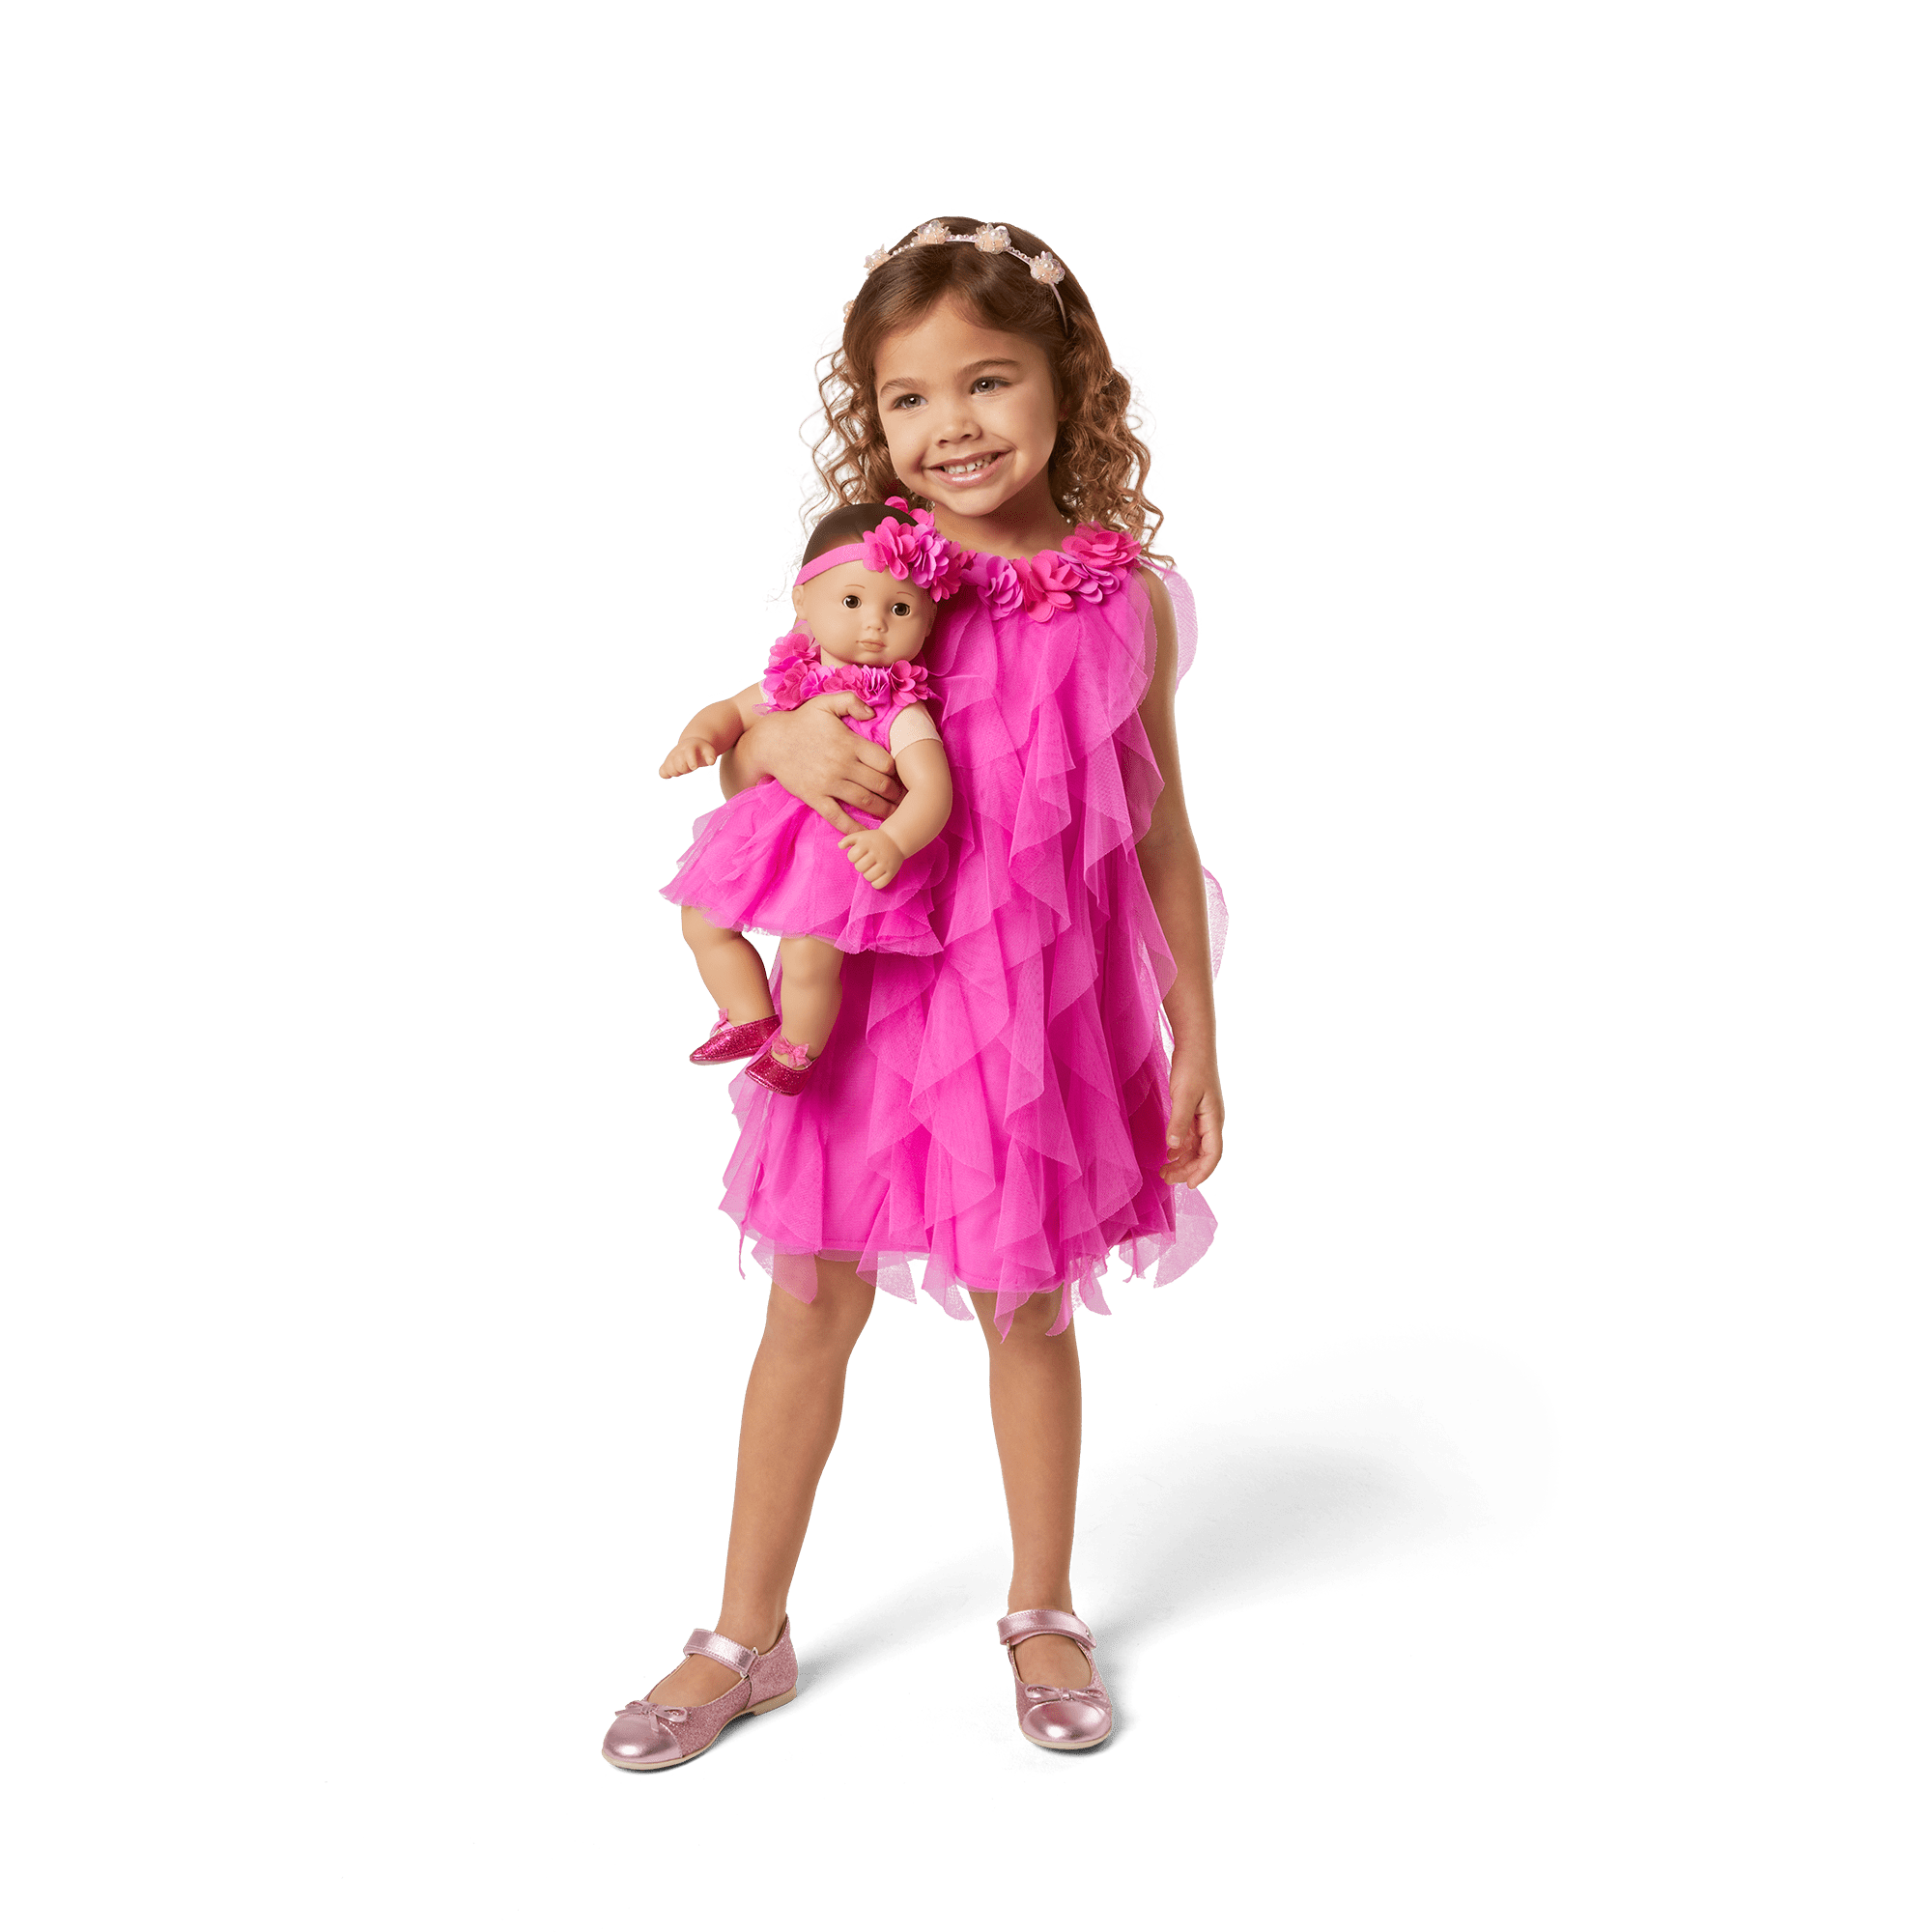 American Girl®: Shop 18” Dolls, Clothing, Playsets & More